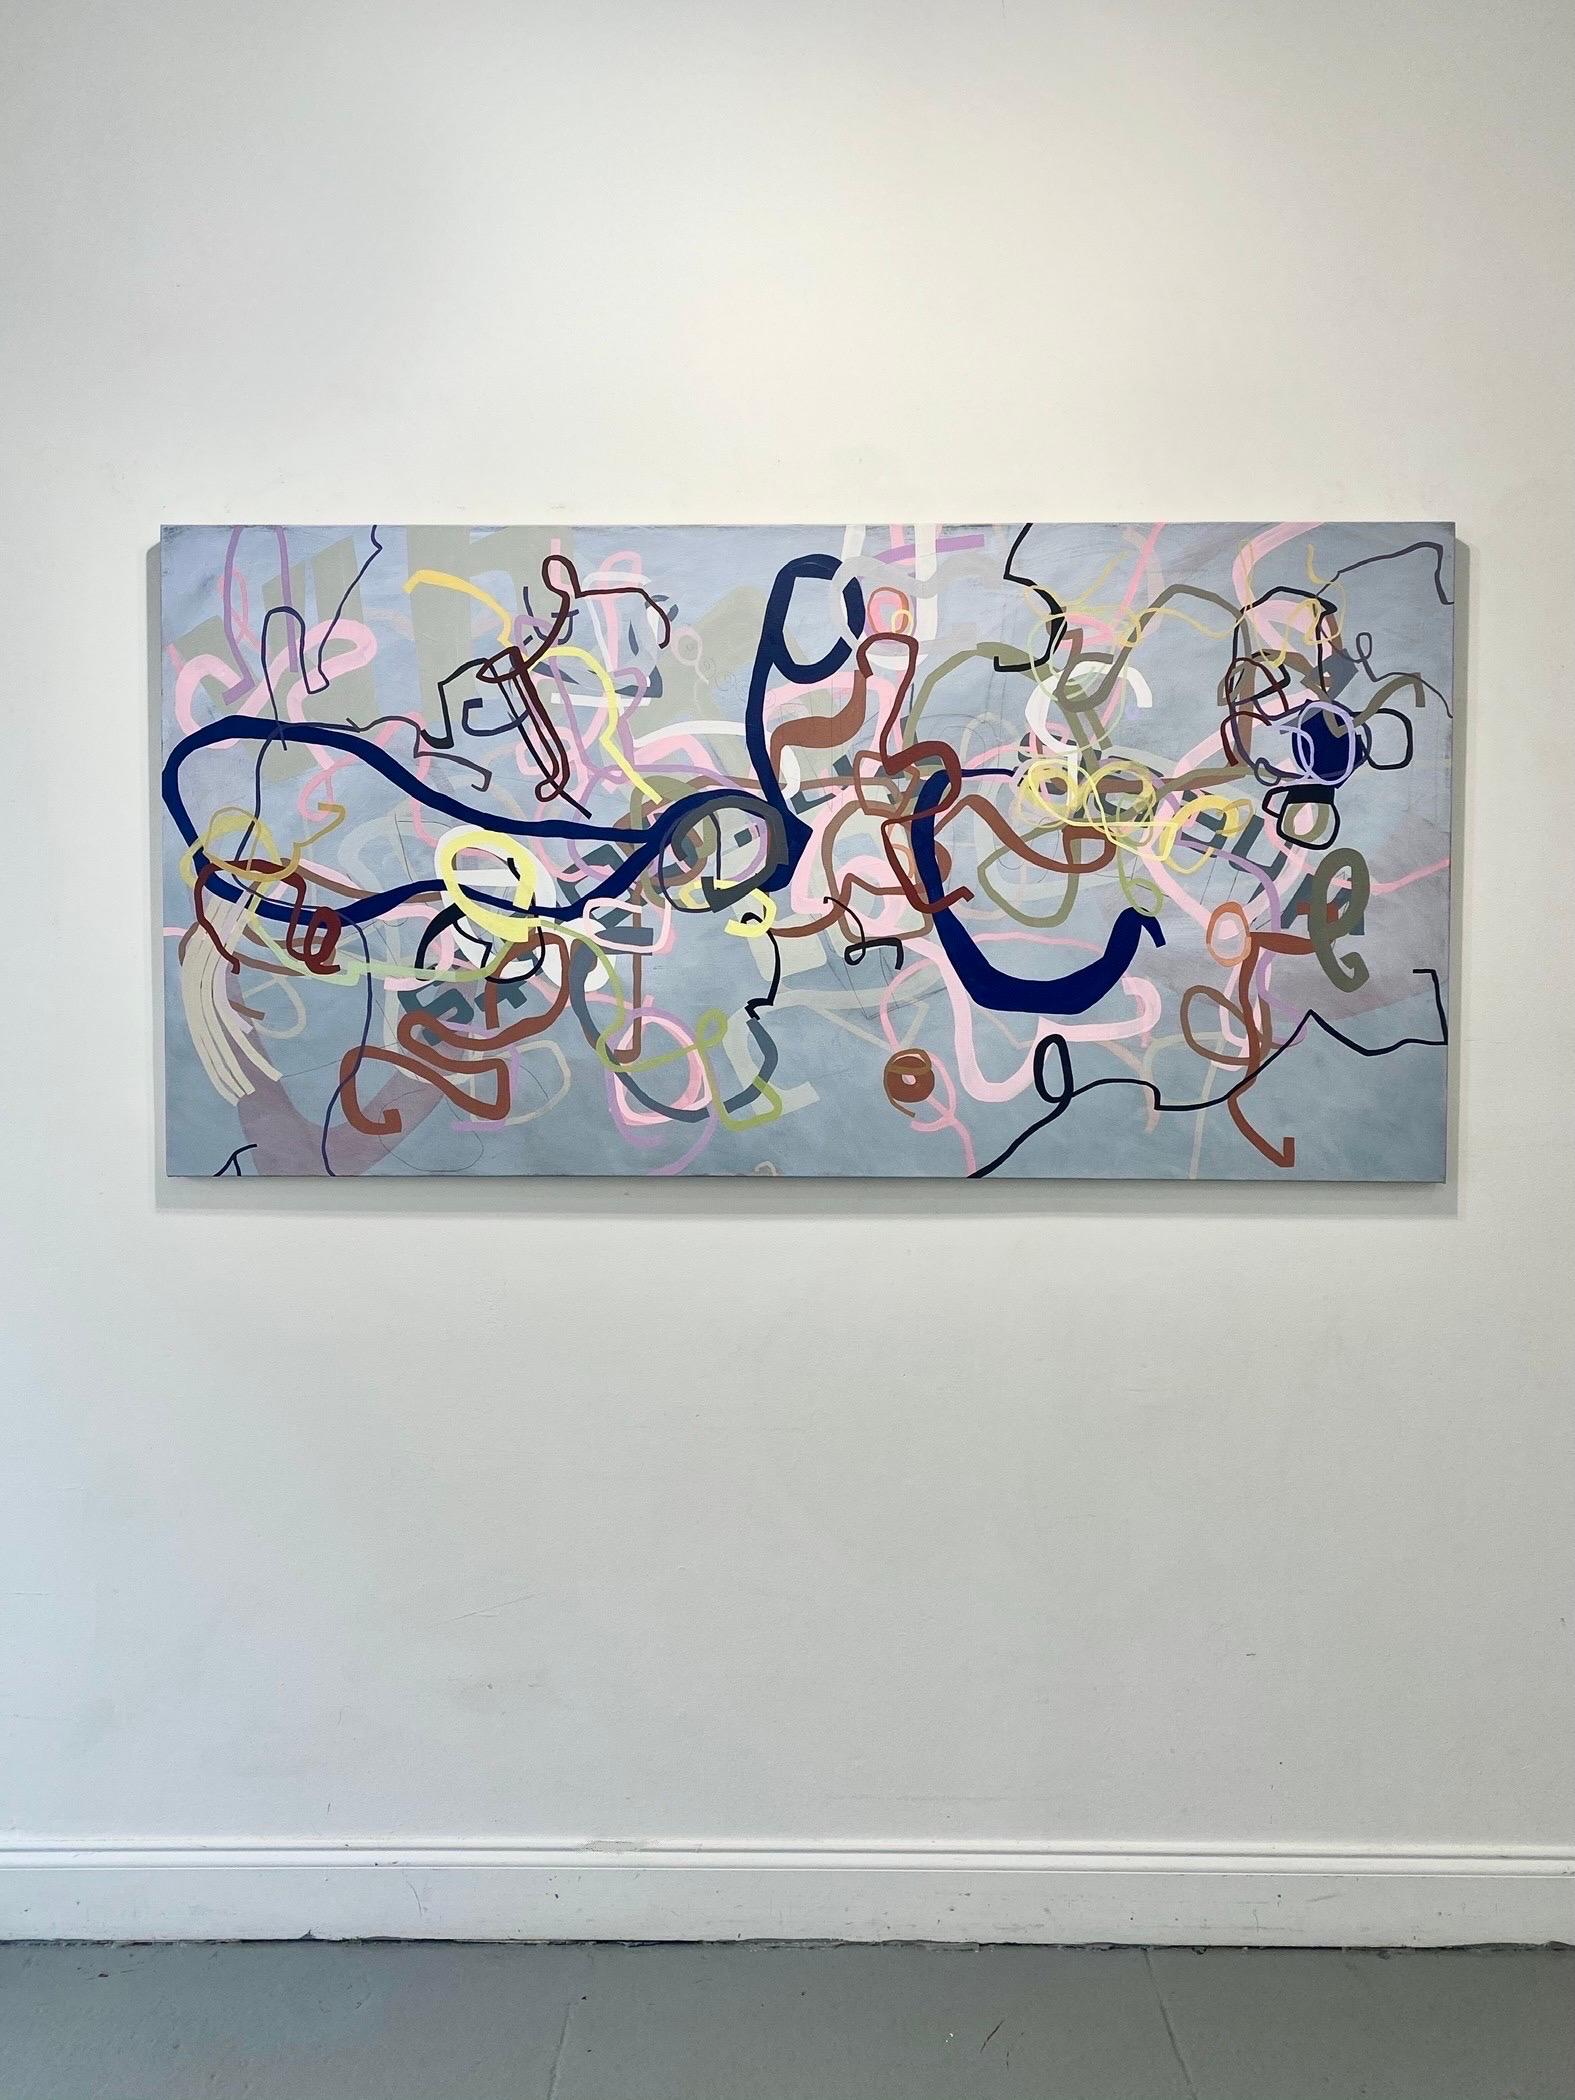 This large scale abstract oil painting contains a line based composition over a neutral blue -  grey ground, that appears sometimes blue, sometimes violet given the time of day and quality of light.  The artist uses beige and light washes to modify